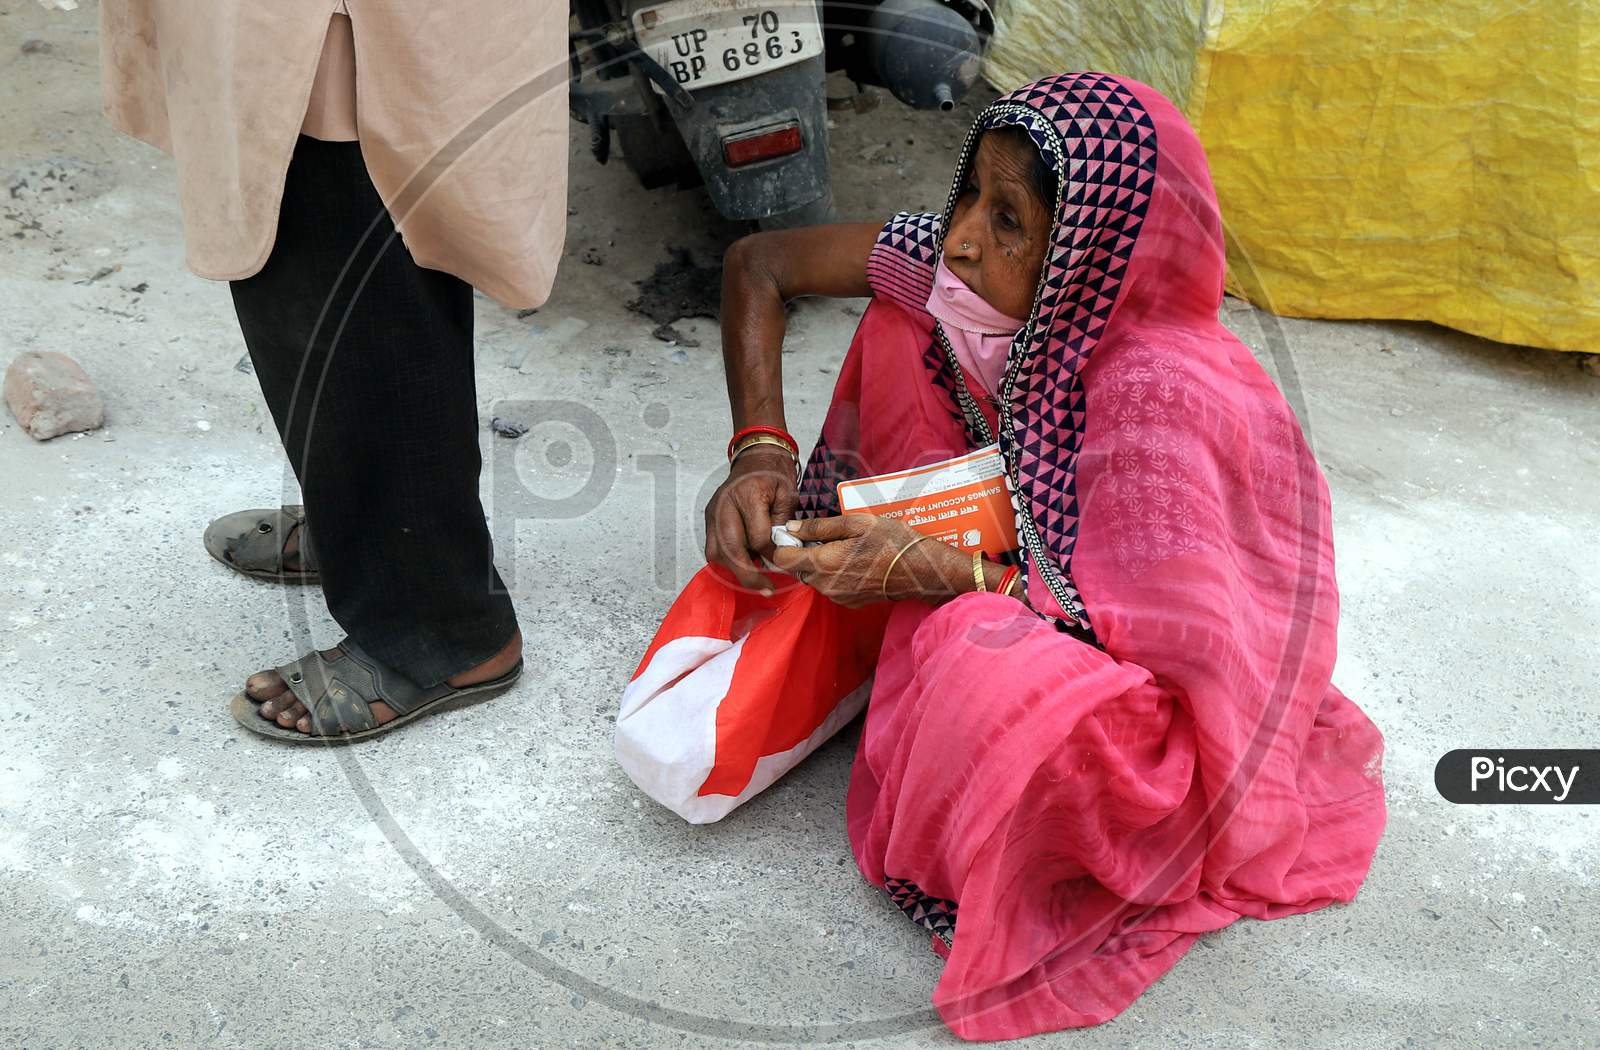 An Old Woman Sitting  In A Queue Line To Withdraw Money  Outside Of A Bank During A Nationwide Lockdown To Slow The Spreading Of The Coronavirus Disease (Covid-19), In Prayagraj, April, 16, 2020.